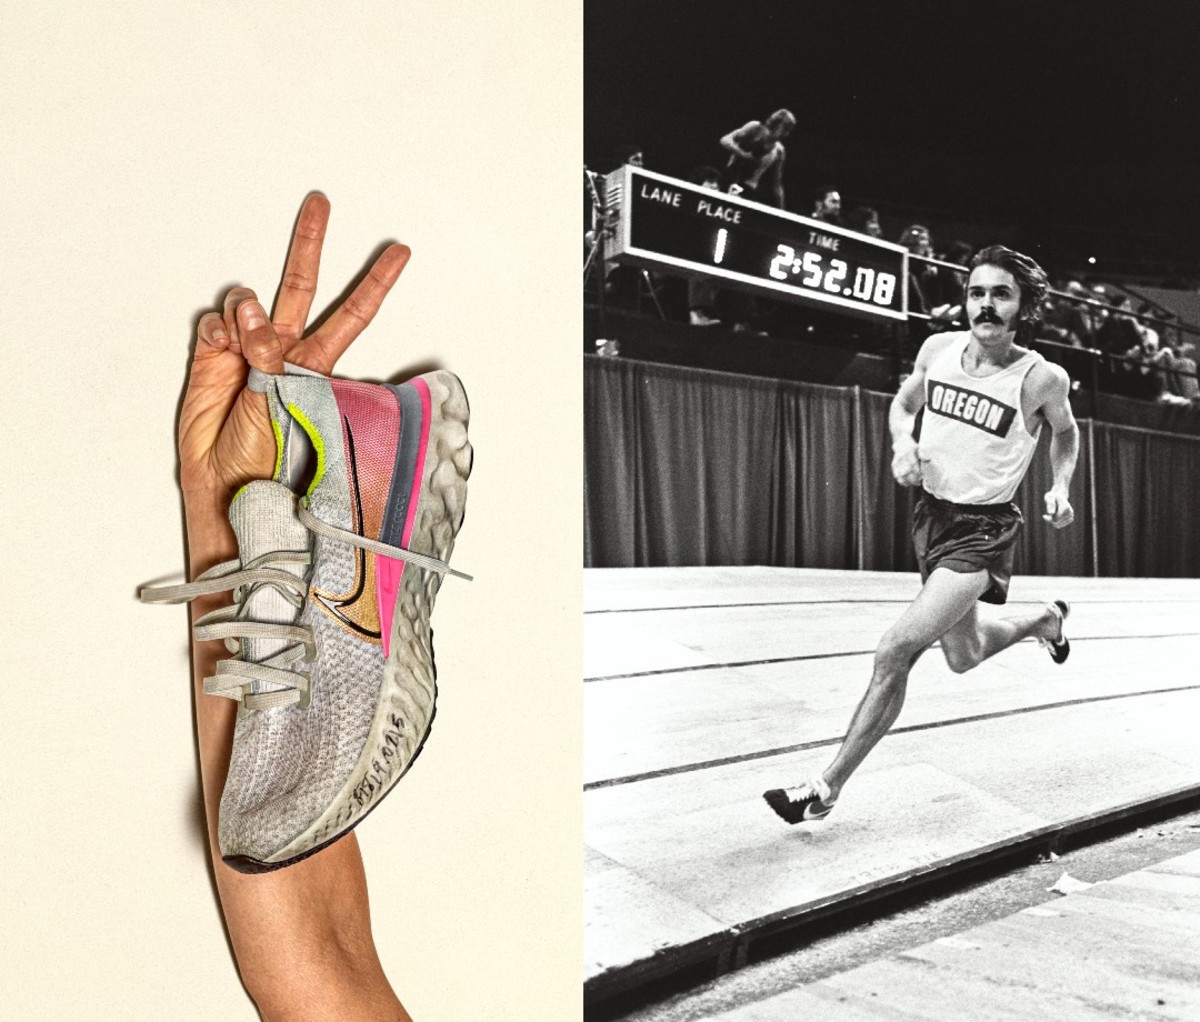 Image to left shows well-used running sneakers in person's hands; right shows runner sprinting on track